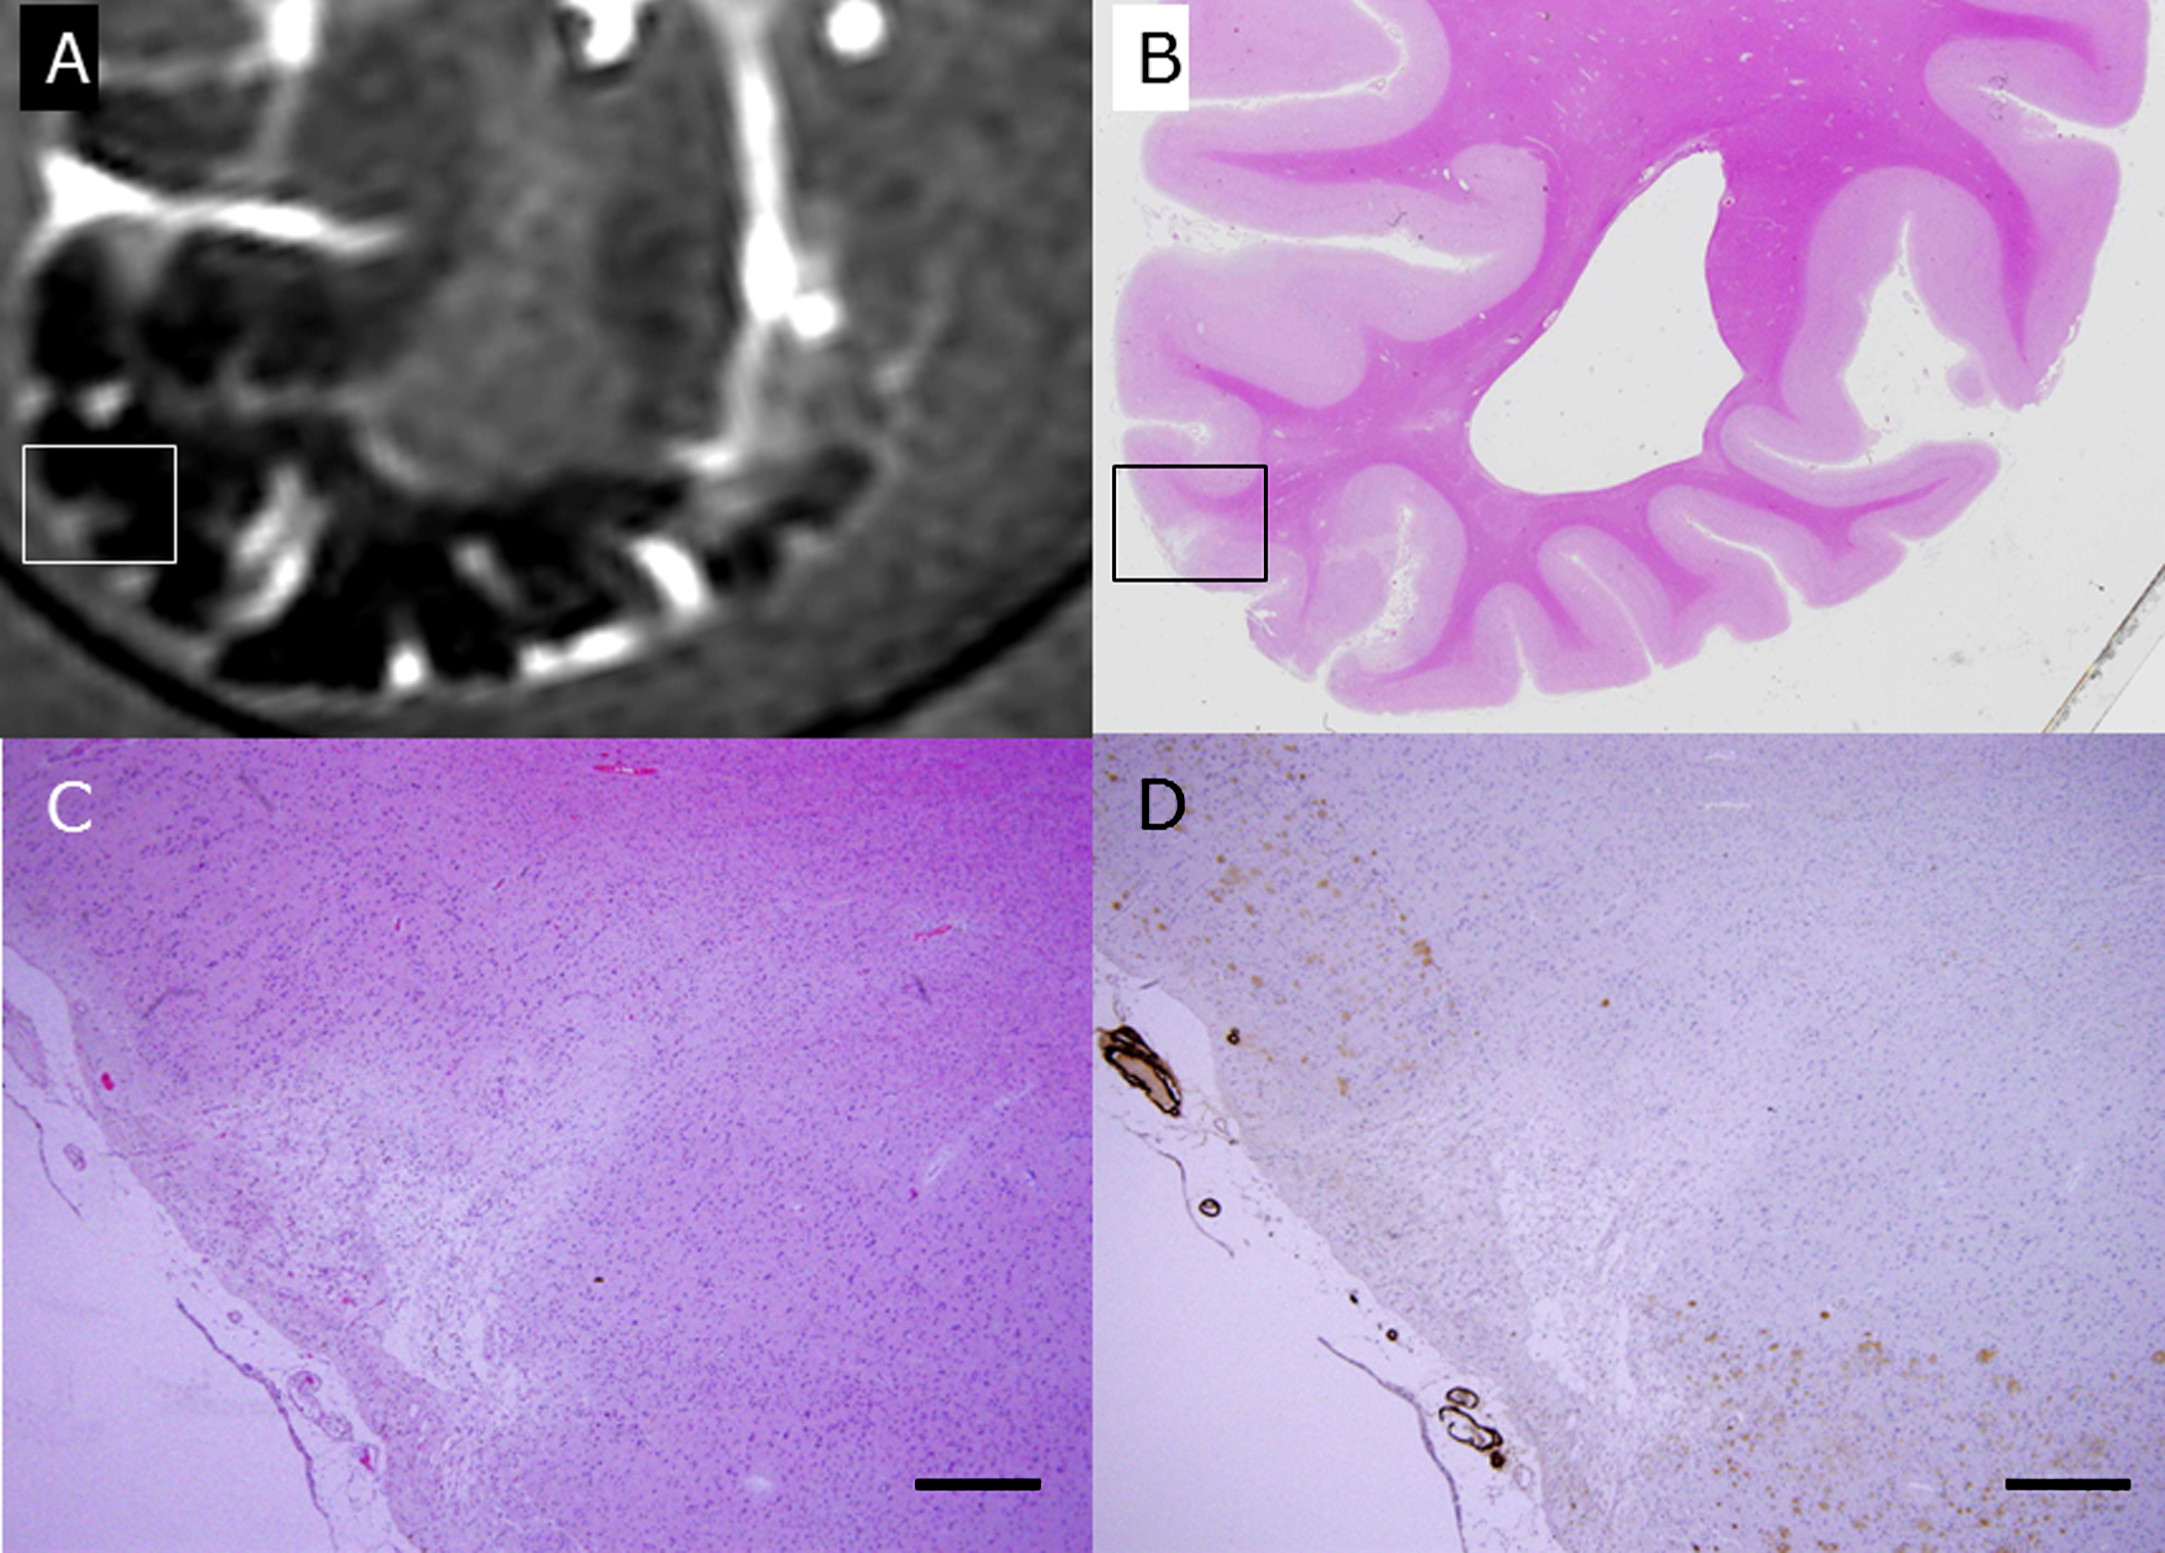 The rectangle in A is a wedge-shaped CMI detected by postmortem 3T MRI FLAIR imaging in the brain of subject C1 (A). This block was subsequently fixed, sliced, and stained with HE (B, C). The rectangle in B is enlarged in C and D. With immunohistochemistry for Aβ (D), senile plaques (brown) are lost in the surrounding CMI, and degenerated Aβ-positive vessels are apposed to the CMI. Scale bars in C and D: 500 μm.